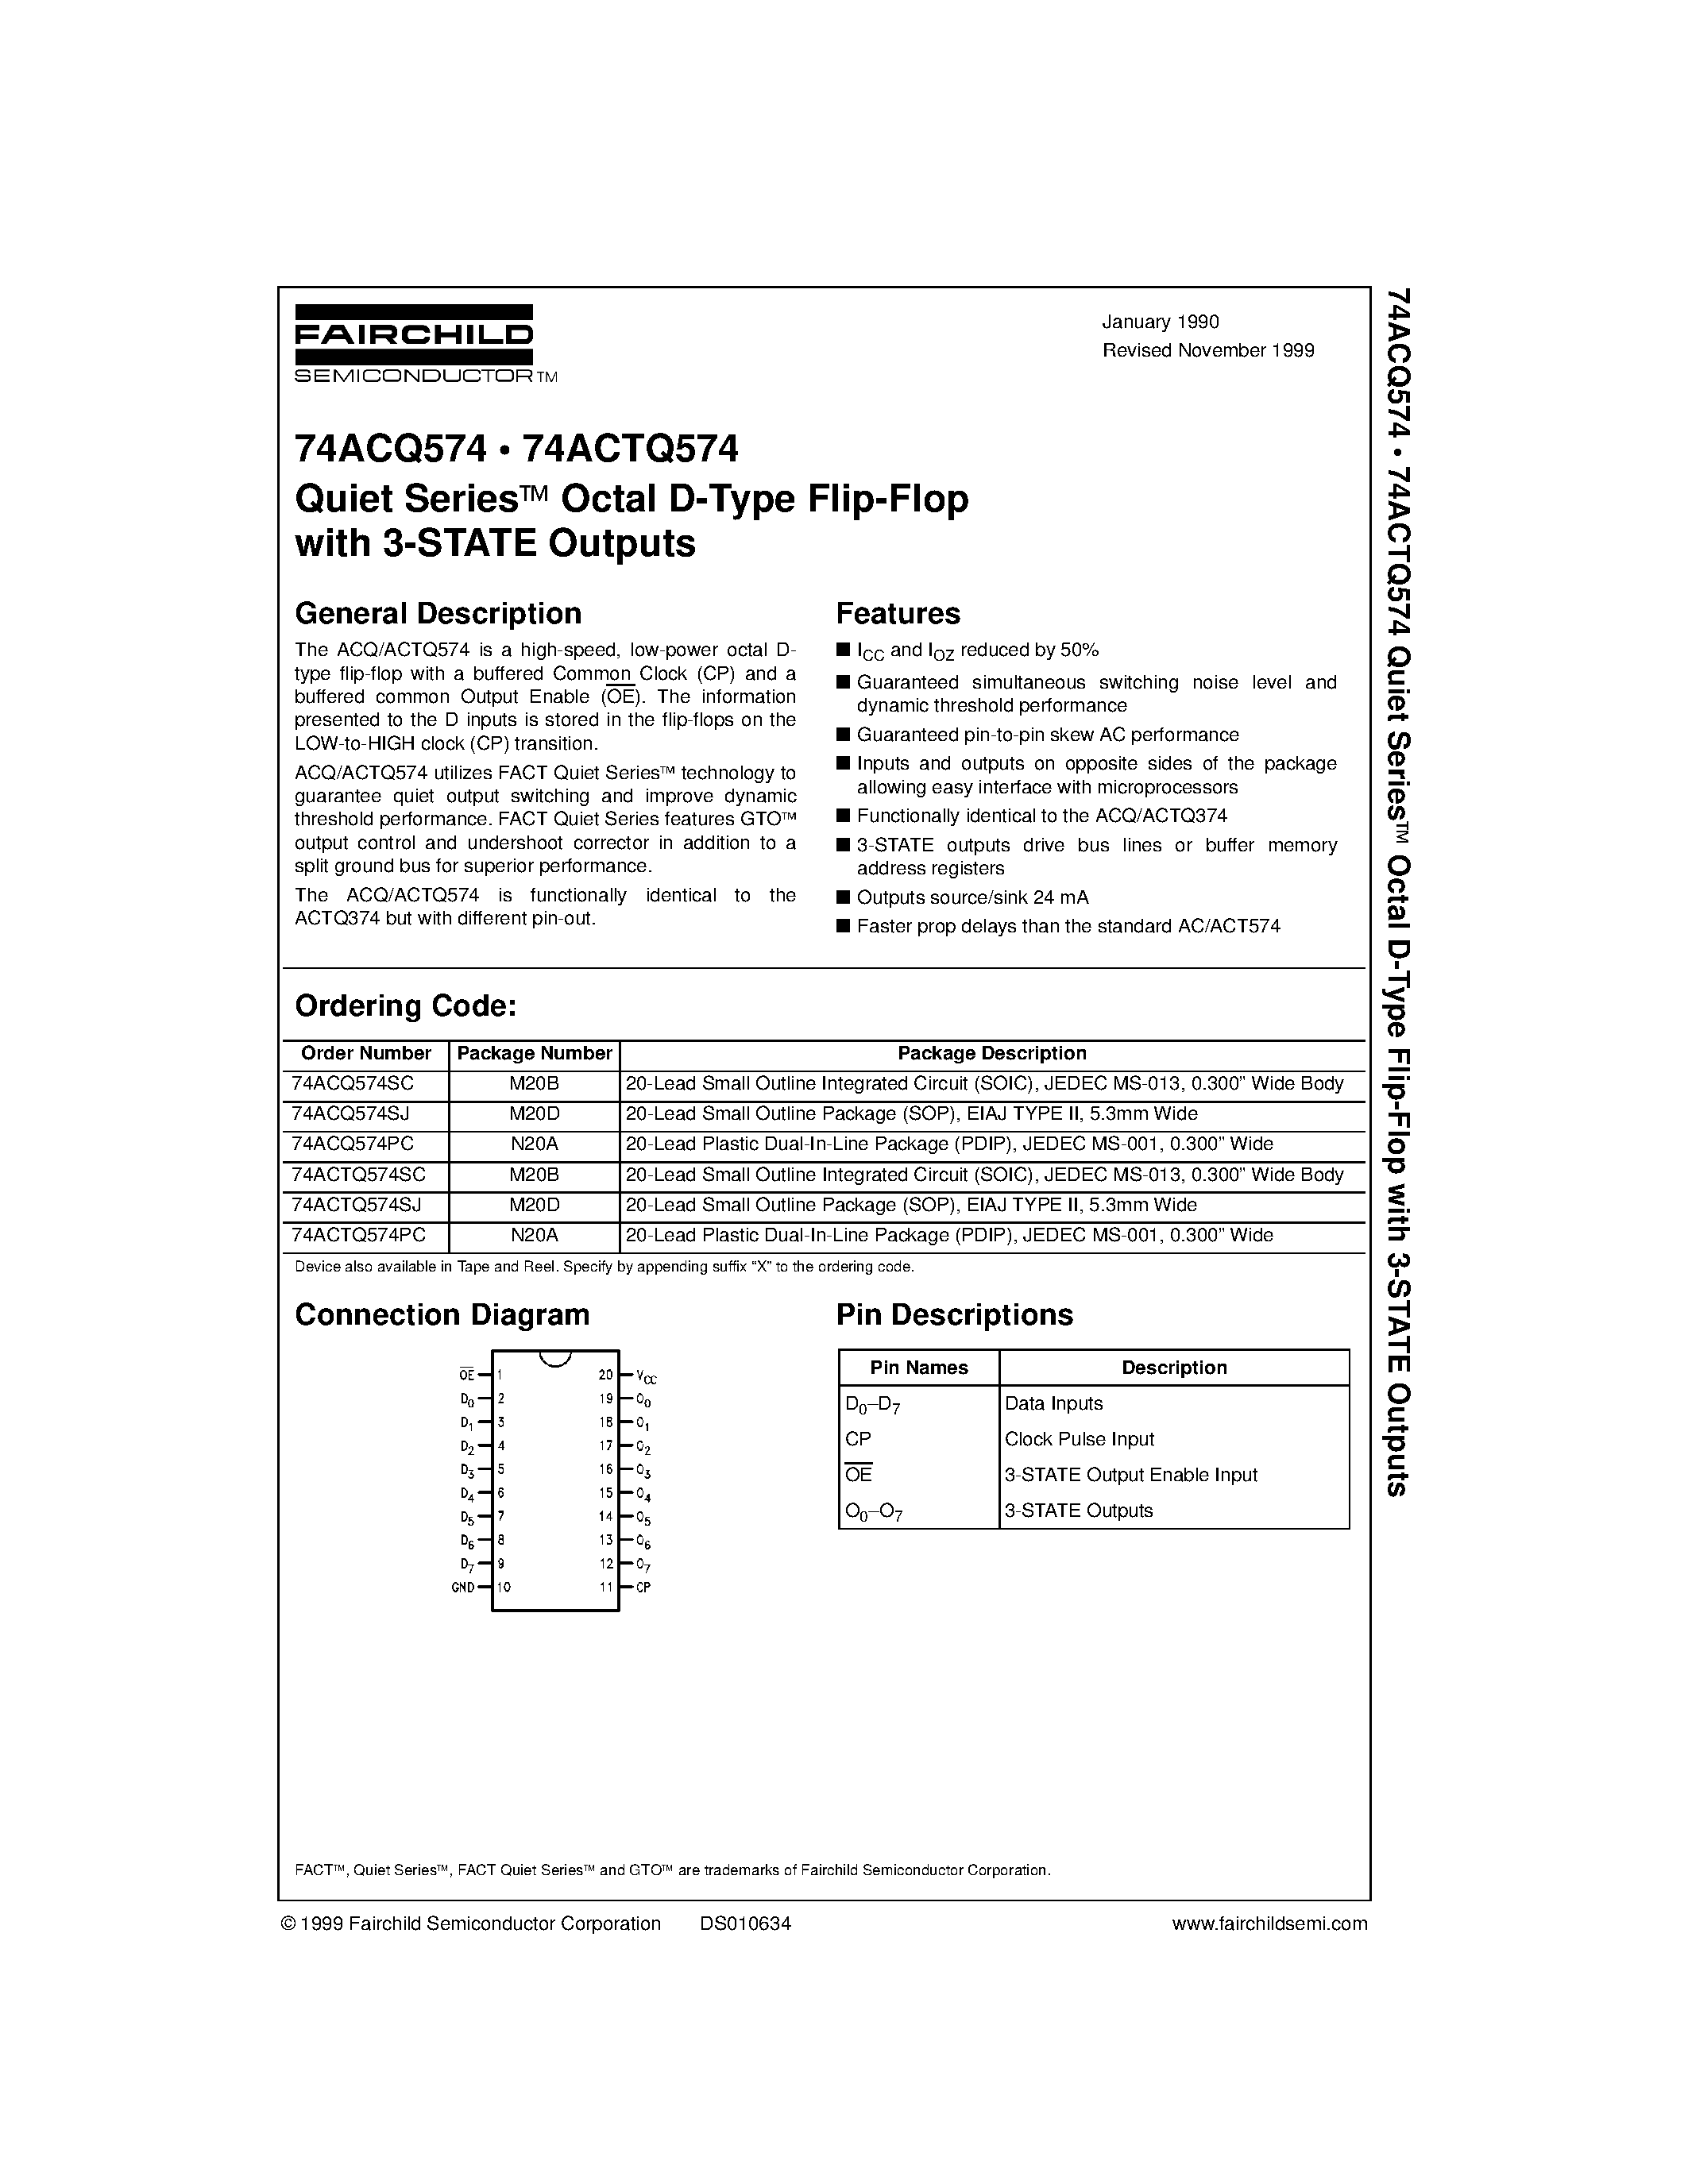 Datasheet 74ACQ574PC - Quiet Series Octal D-Type Flip-Flop with 3-STATE Outputs page 1